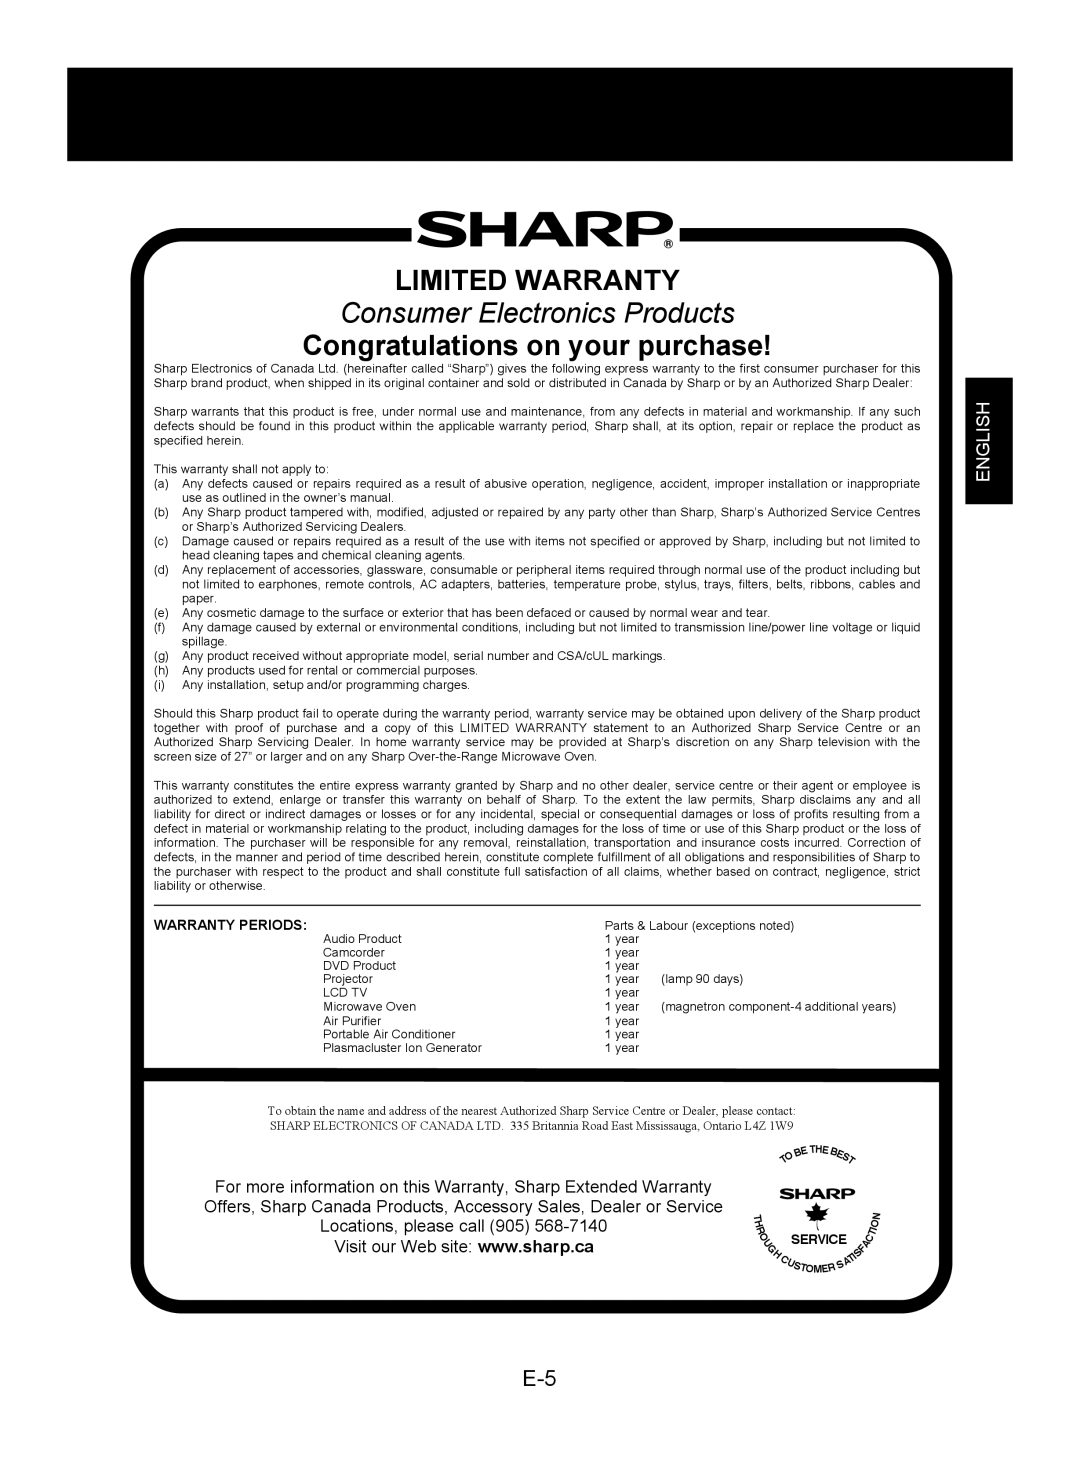 Sharp KC-850U Limited Warranty, Consumer Electronics Products, Congratulations on your purchase, English, Service 